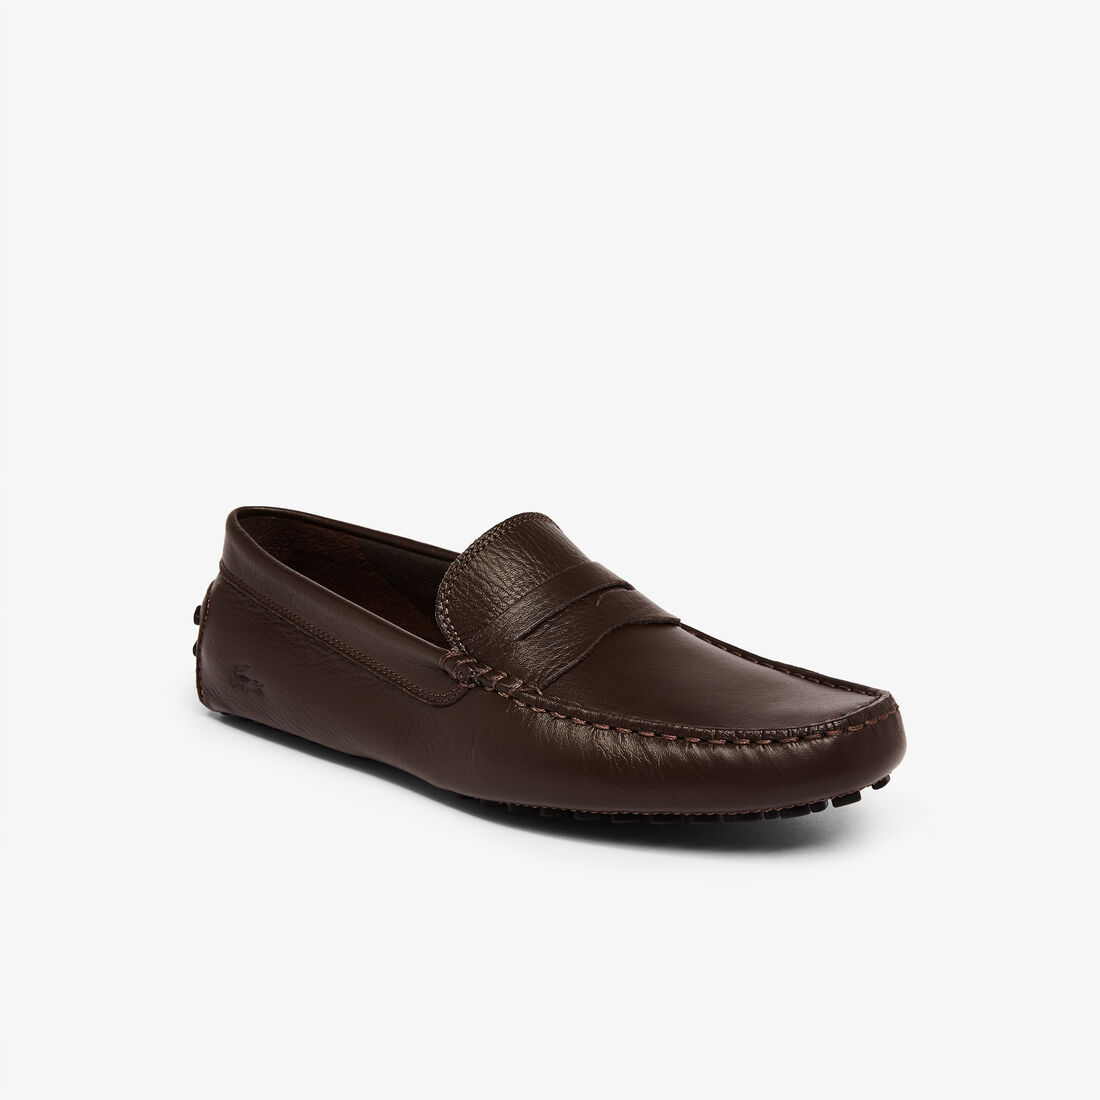 Men's Concours Leather Driving Shoes